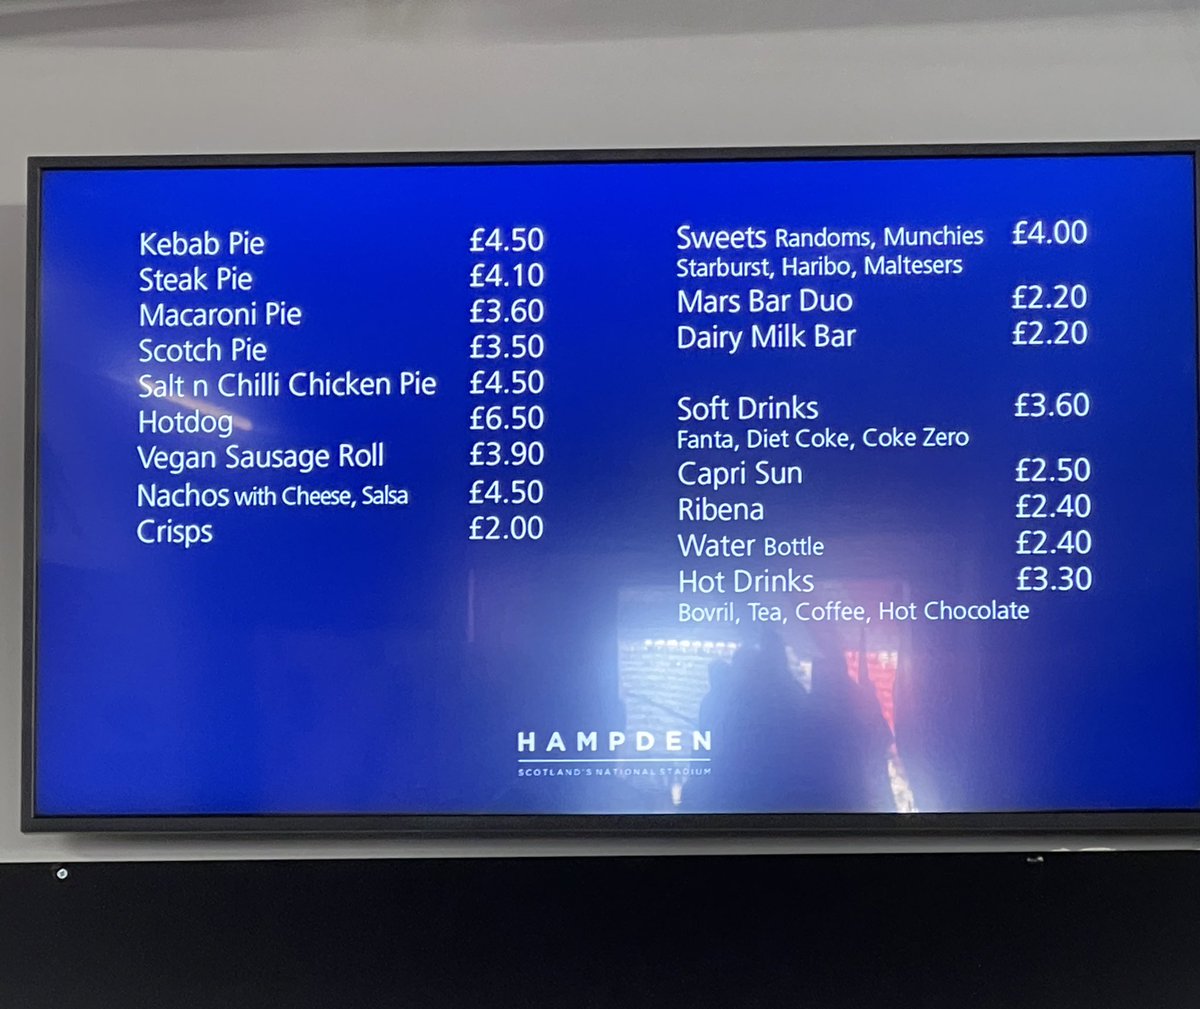 Prices at football are beyond a joke. £2.50 for a Capri Sun? £2.40 for water. Can only imagine the price when taking kids. Embarrassing @ScottishFA